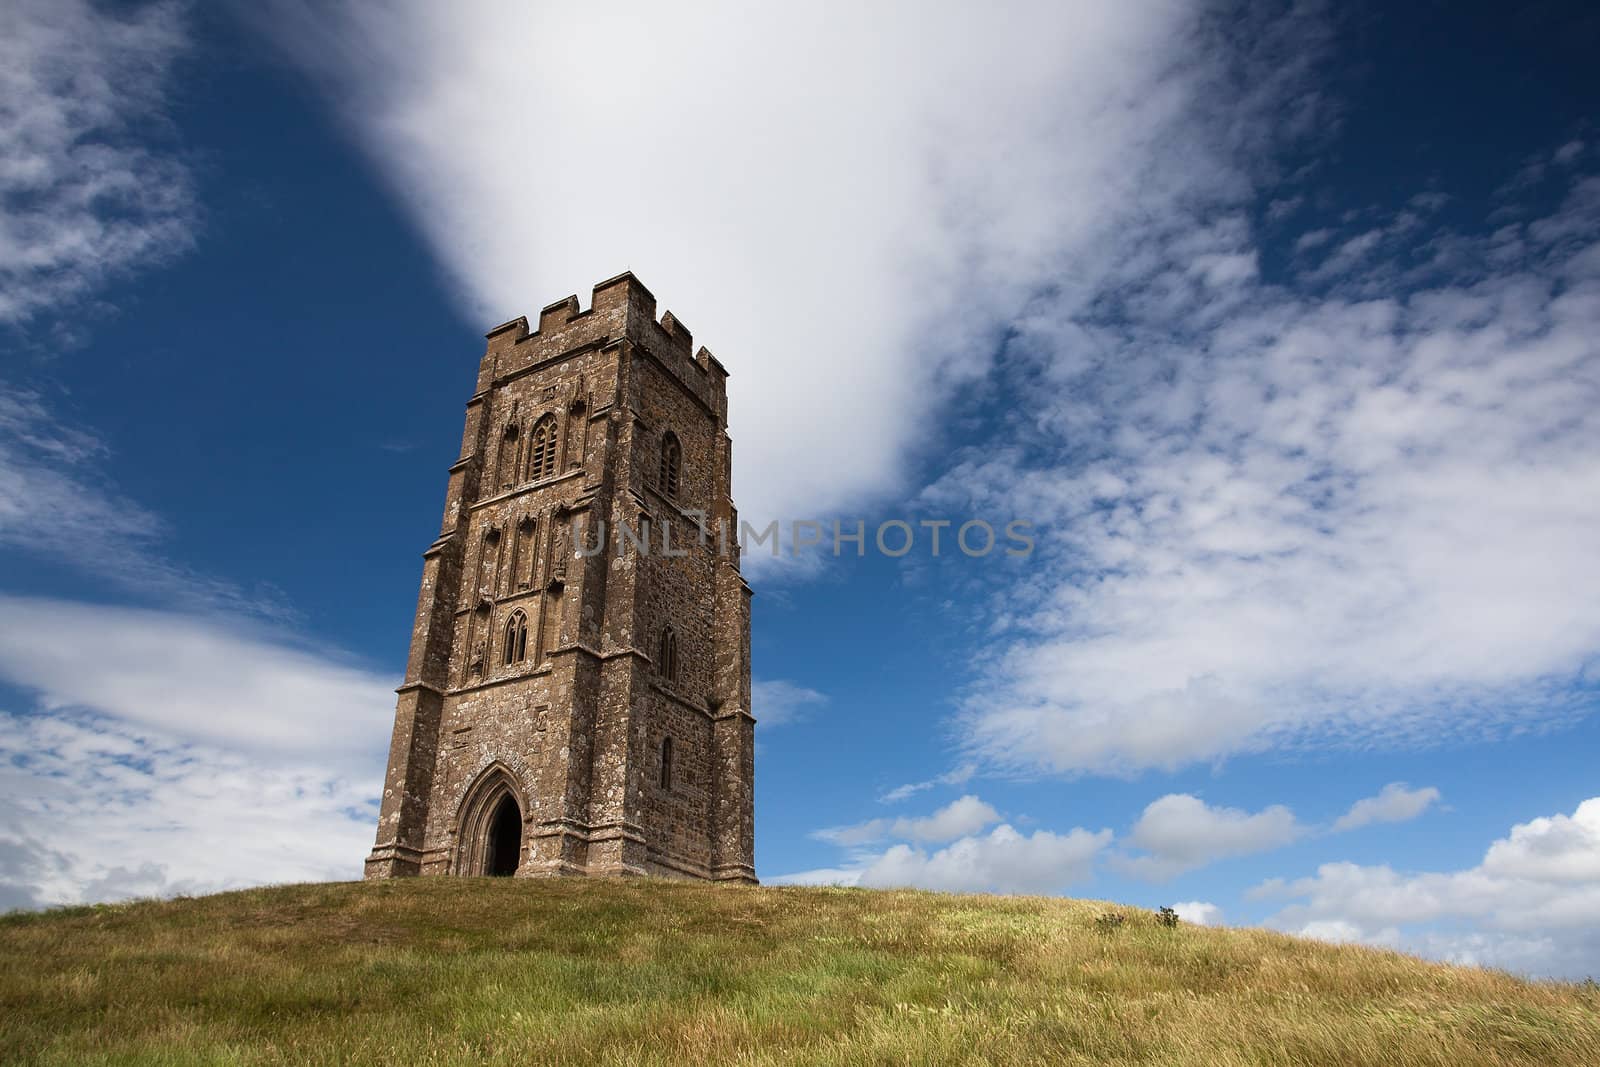 Tourists exploring the ruins of St. Michael's Tower at the top of glastonbury tor in sommerest england